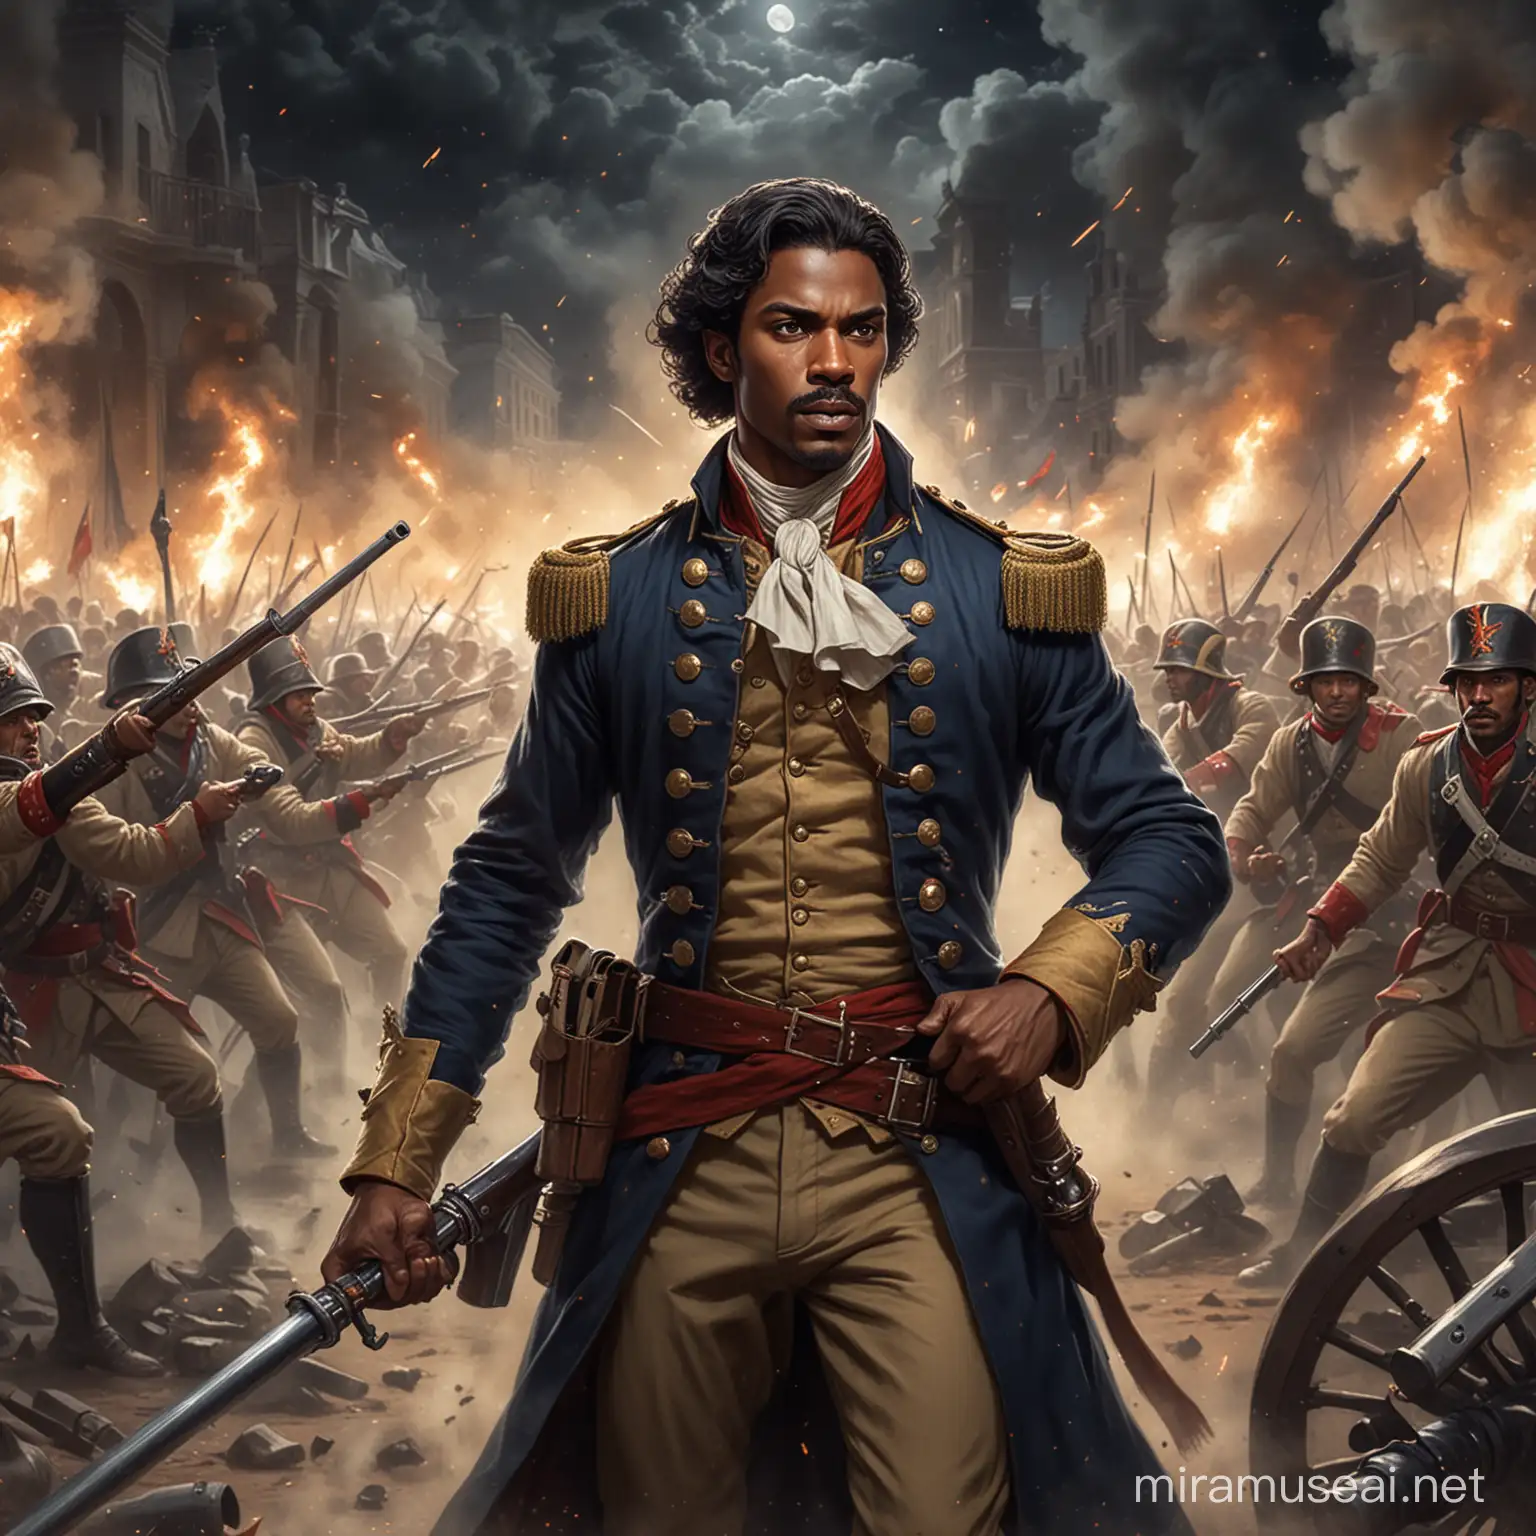 A heroic prince leading a fierce resistance against colonial oppression, surrounded by the thunderous roar of cannons in the night.